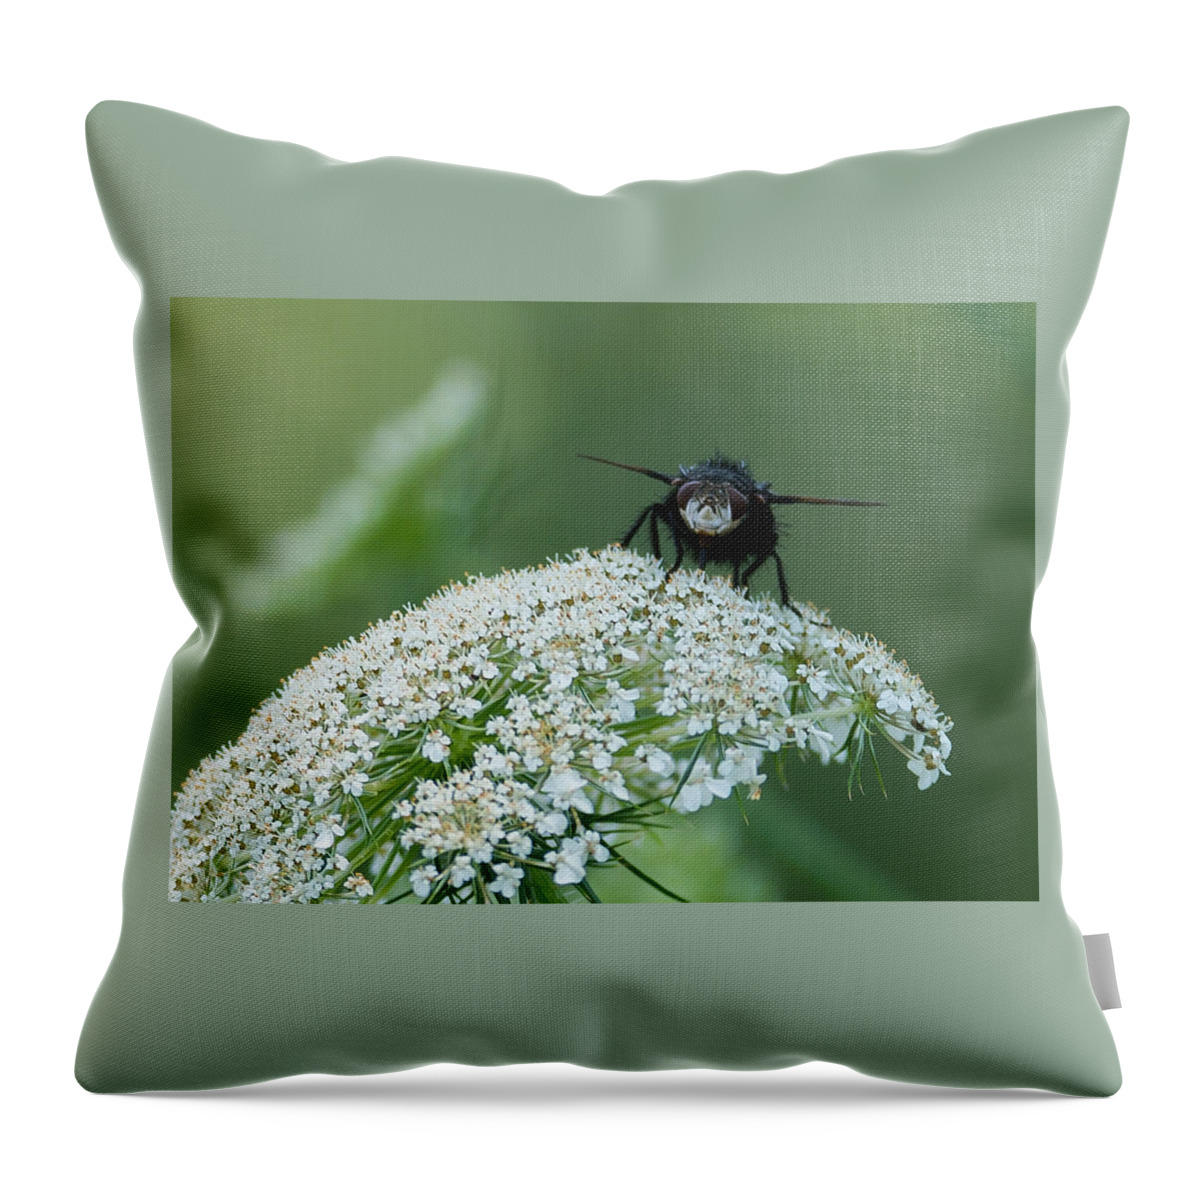 Plant Throw Pillow featuring the photograph Nature Up Close by Holden The Moment